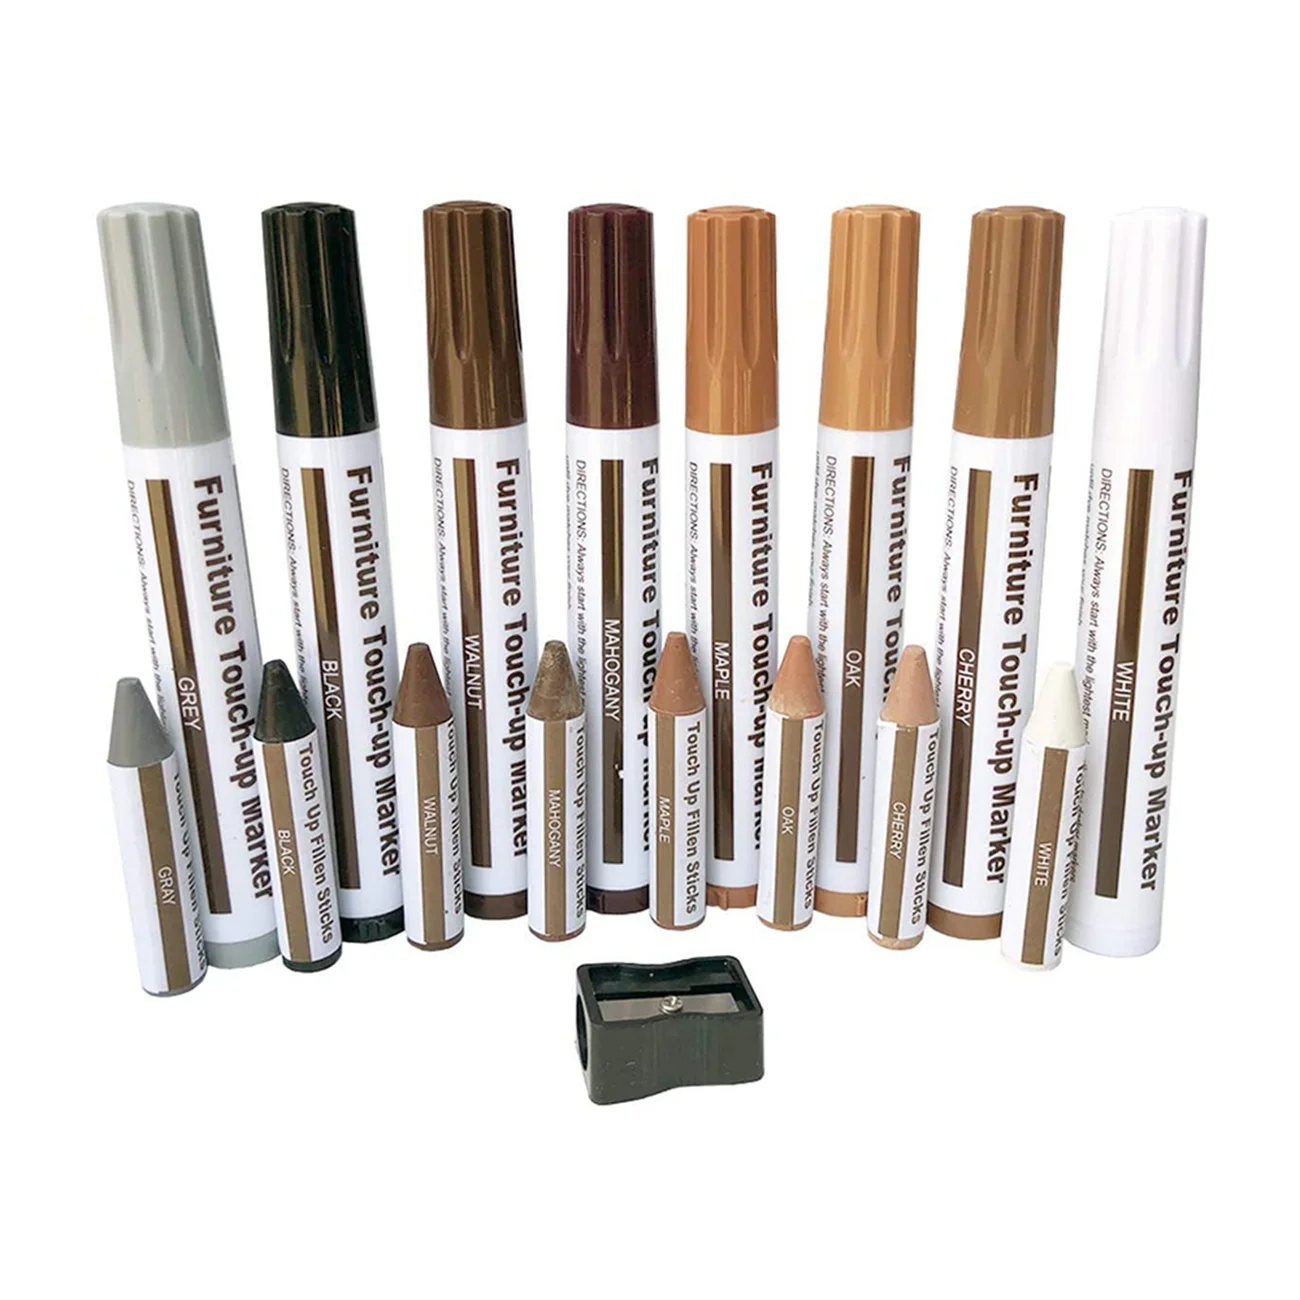 

Furniture Repair Kit Wood Markers - Set of 17 - Markers and Wax Sticks with Sharpener Kit, for Scratches, Wood Floors